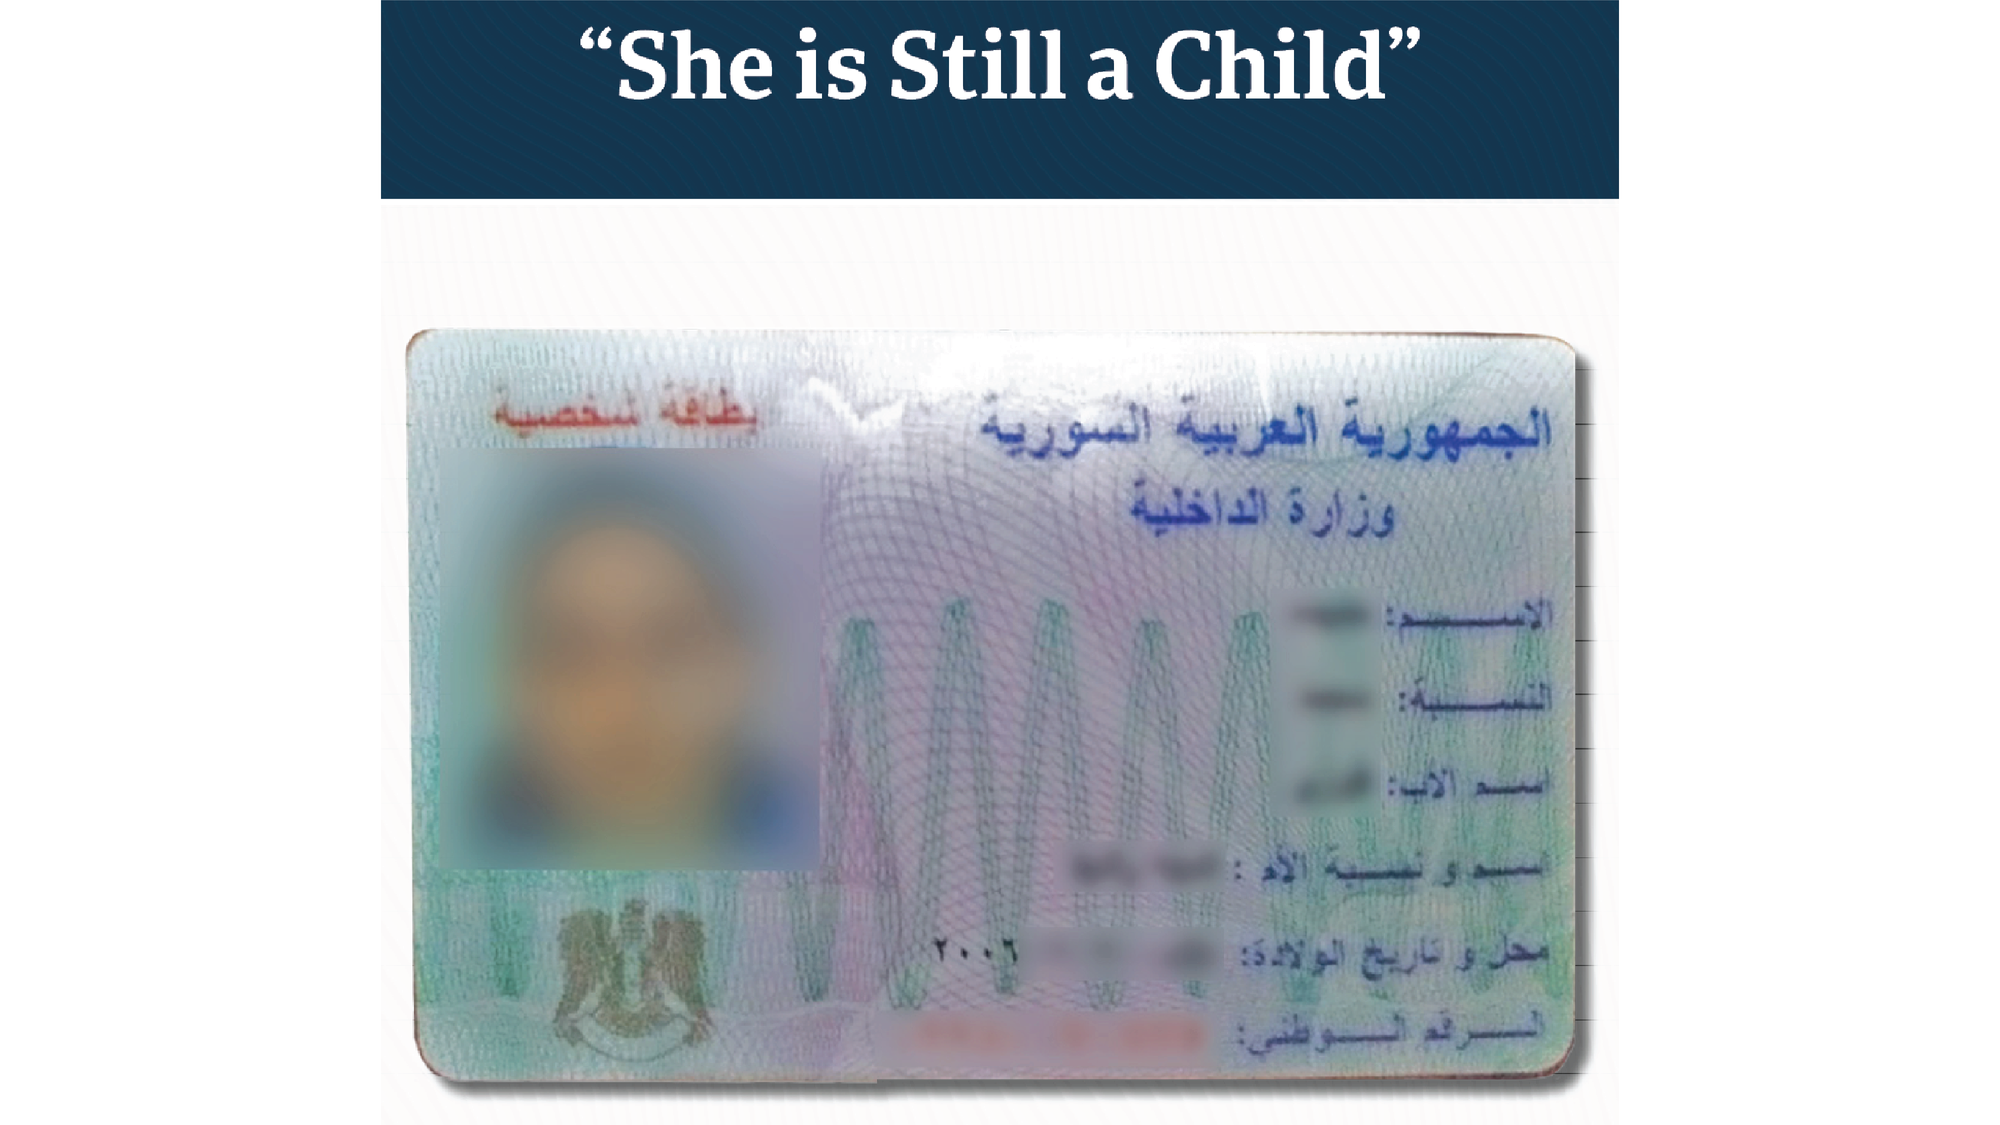 “She is Still a Child": Investigating Child Recruitment Practices by the Revolutionary Youth in NE Syria